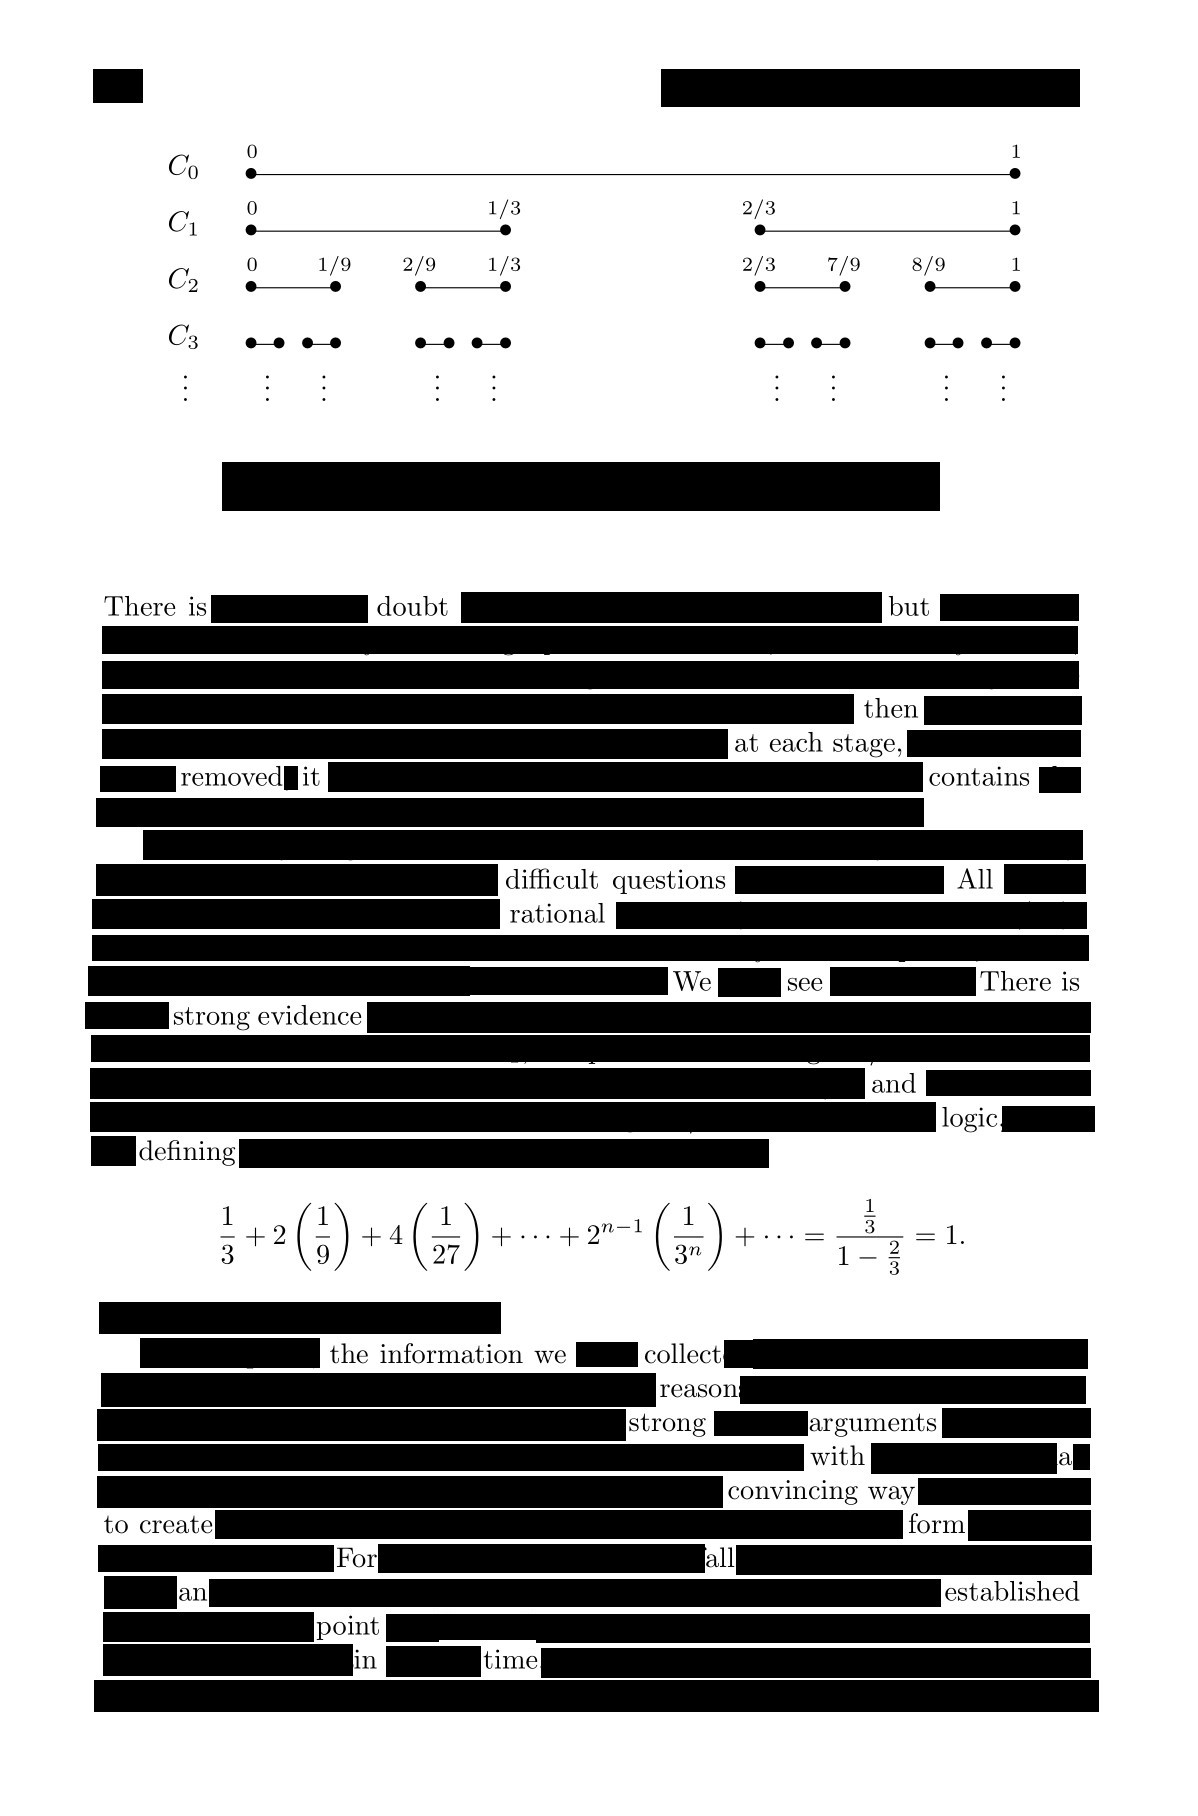 An erasure poem entitled 'A Real Challenge' from the book 'Understanding Analysis' by Stephen Abbott